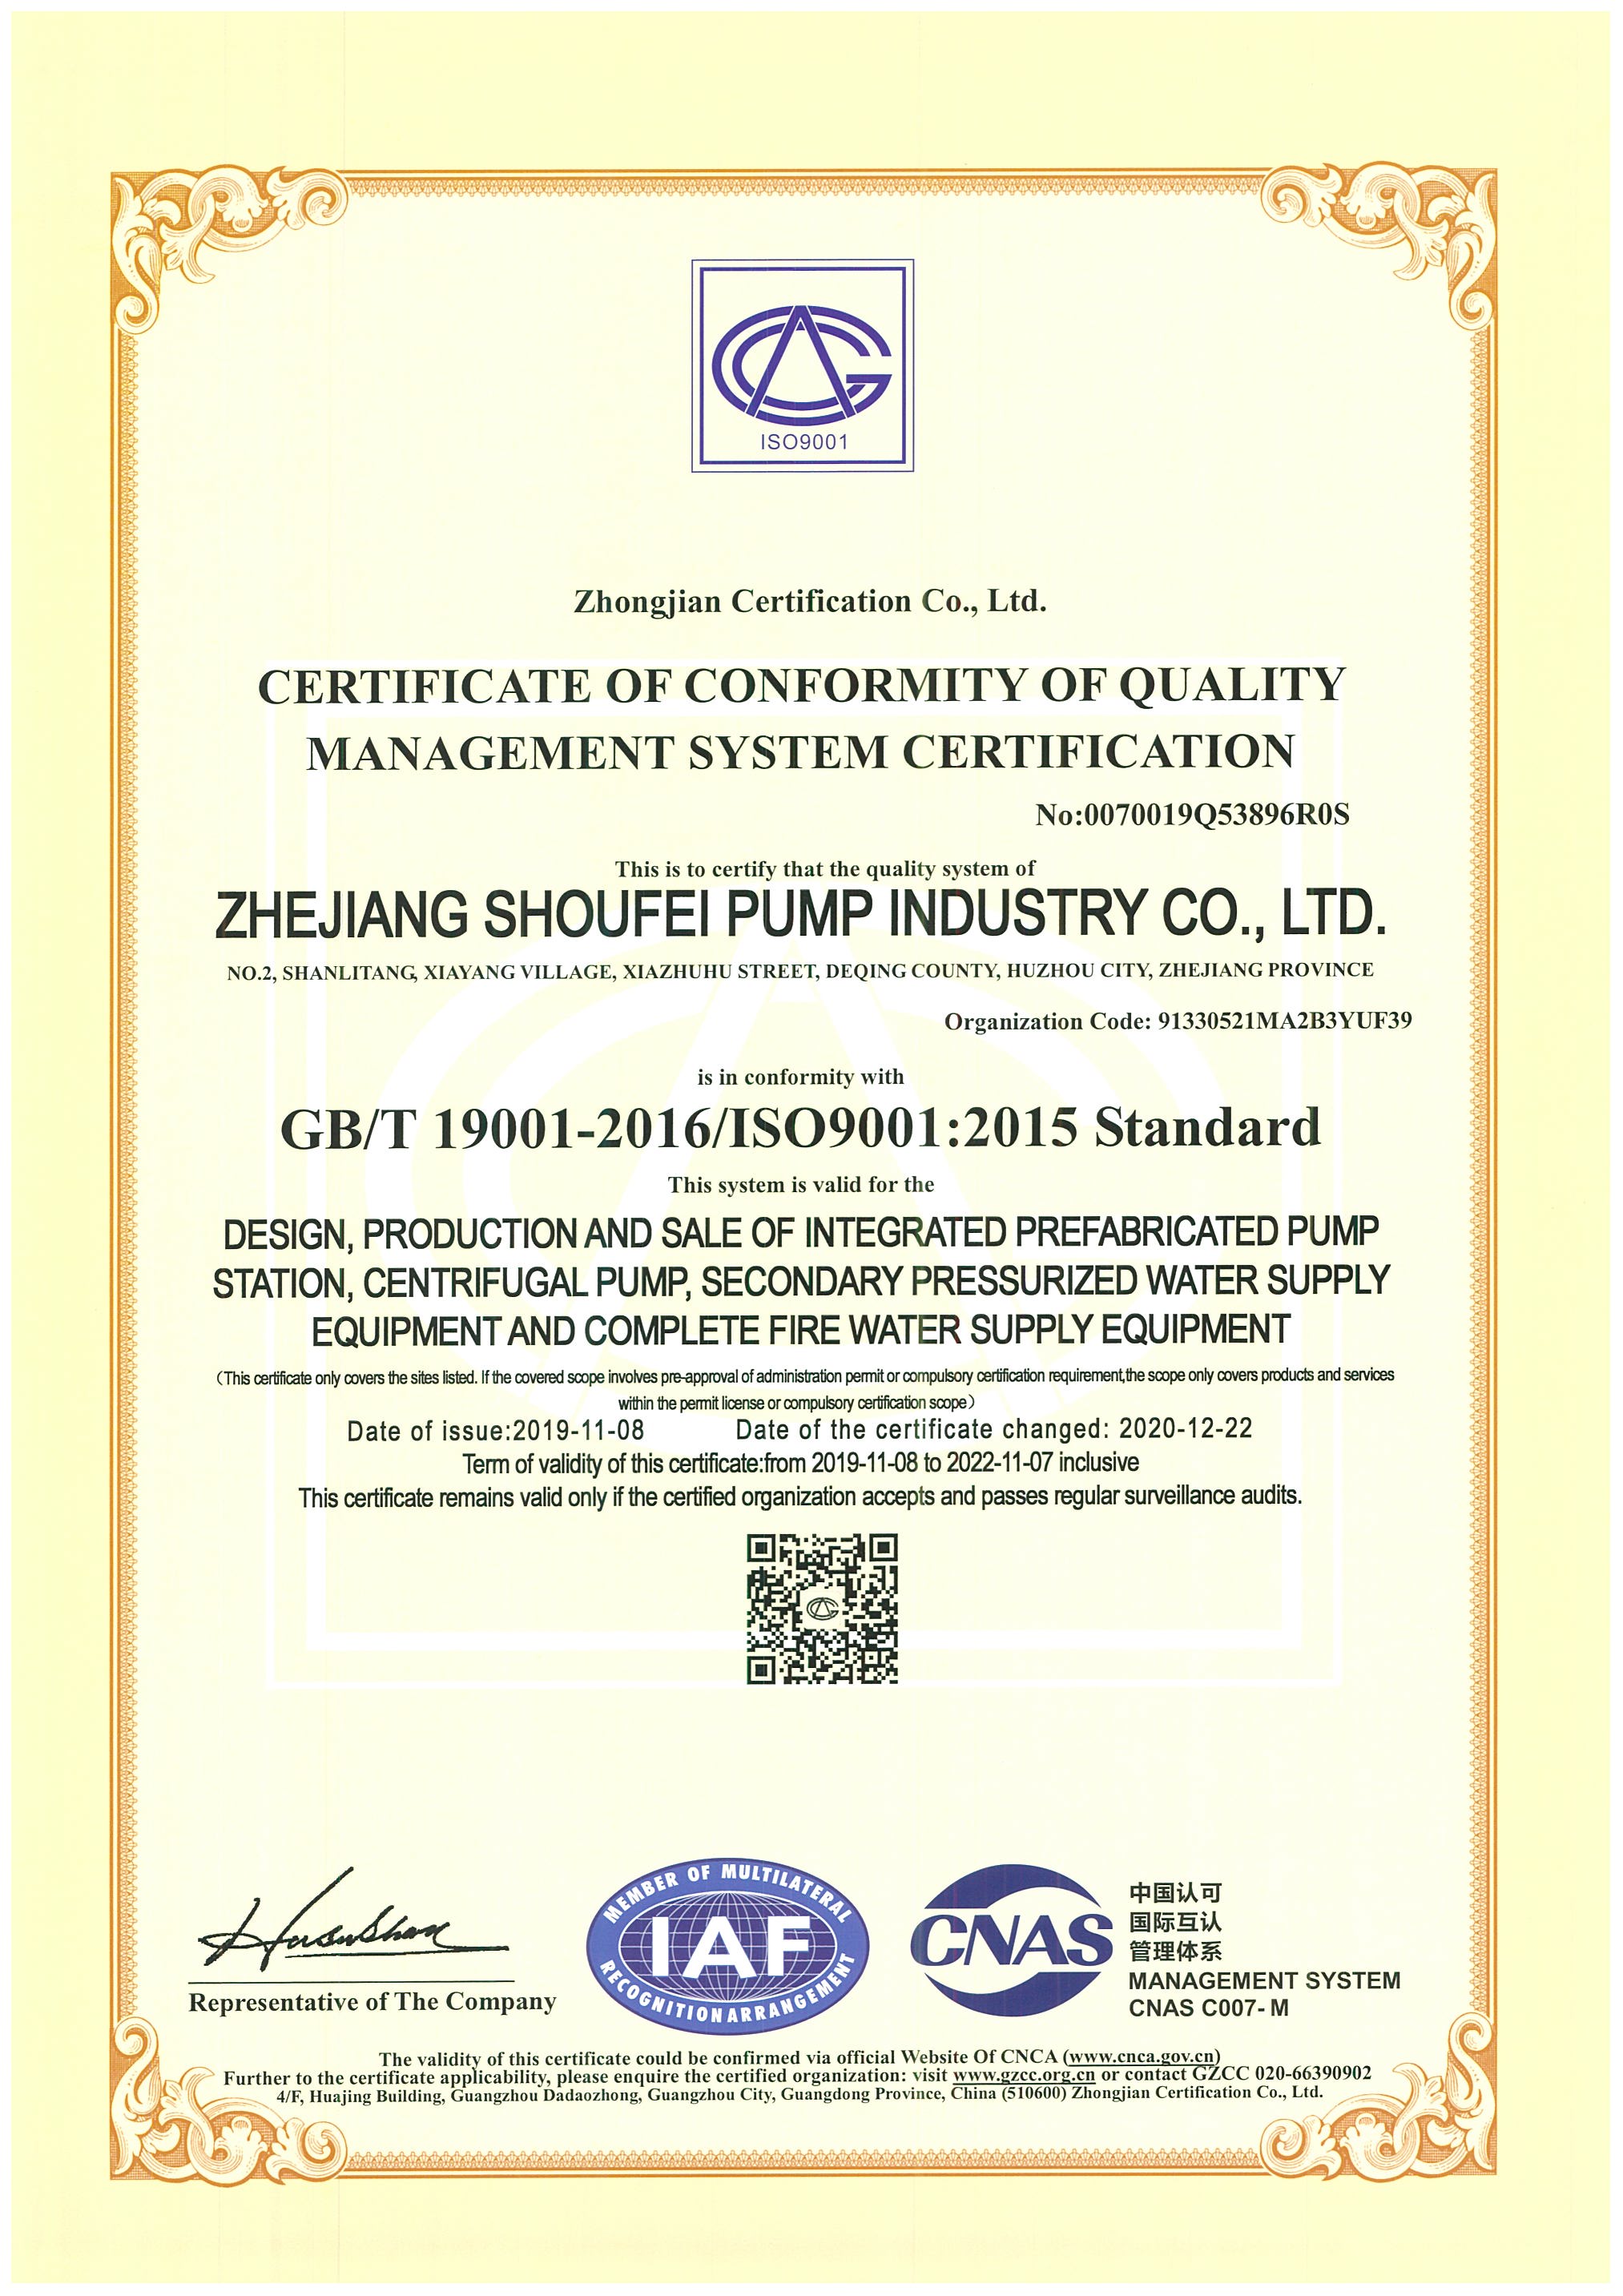 CERTIFICATE OF CONFORMITY OF QUALITY